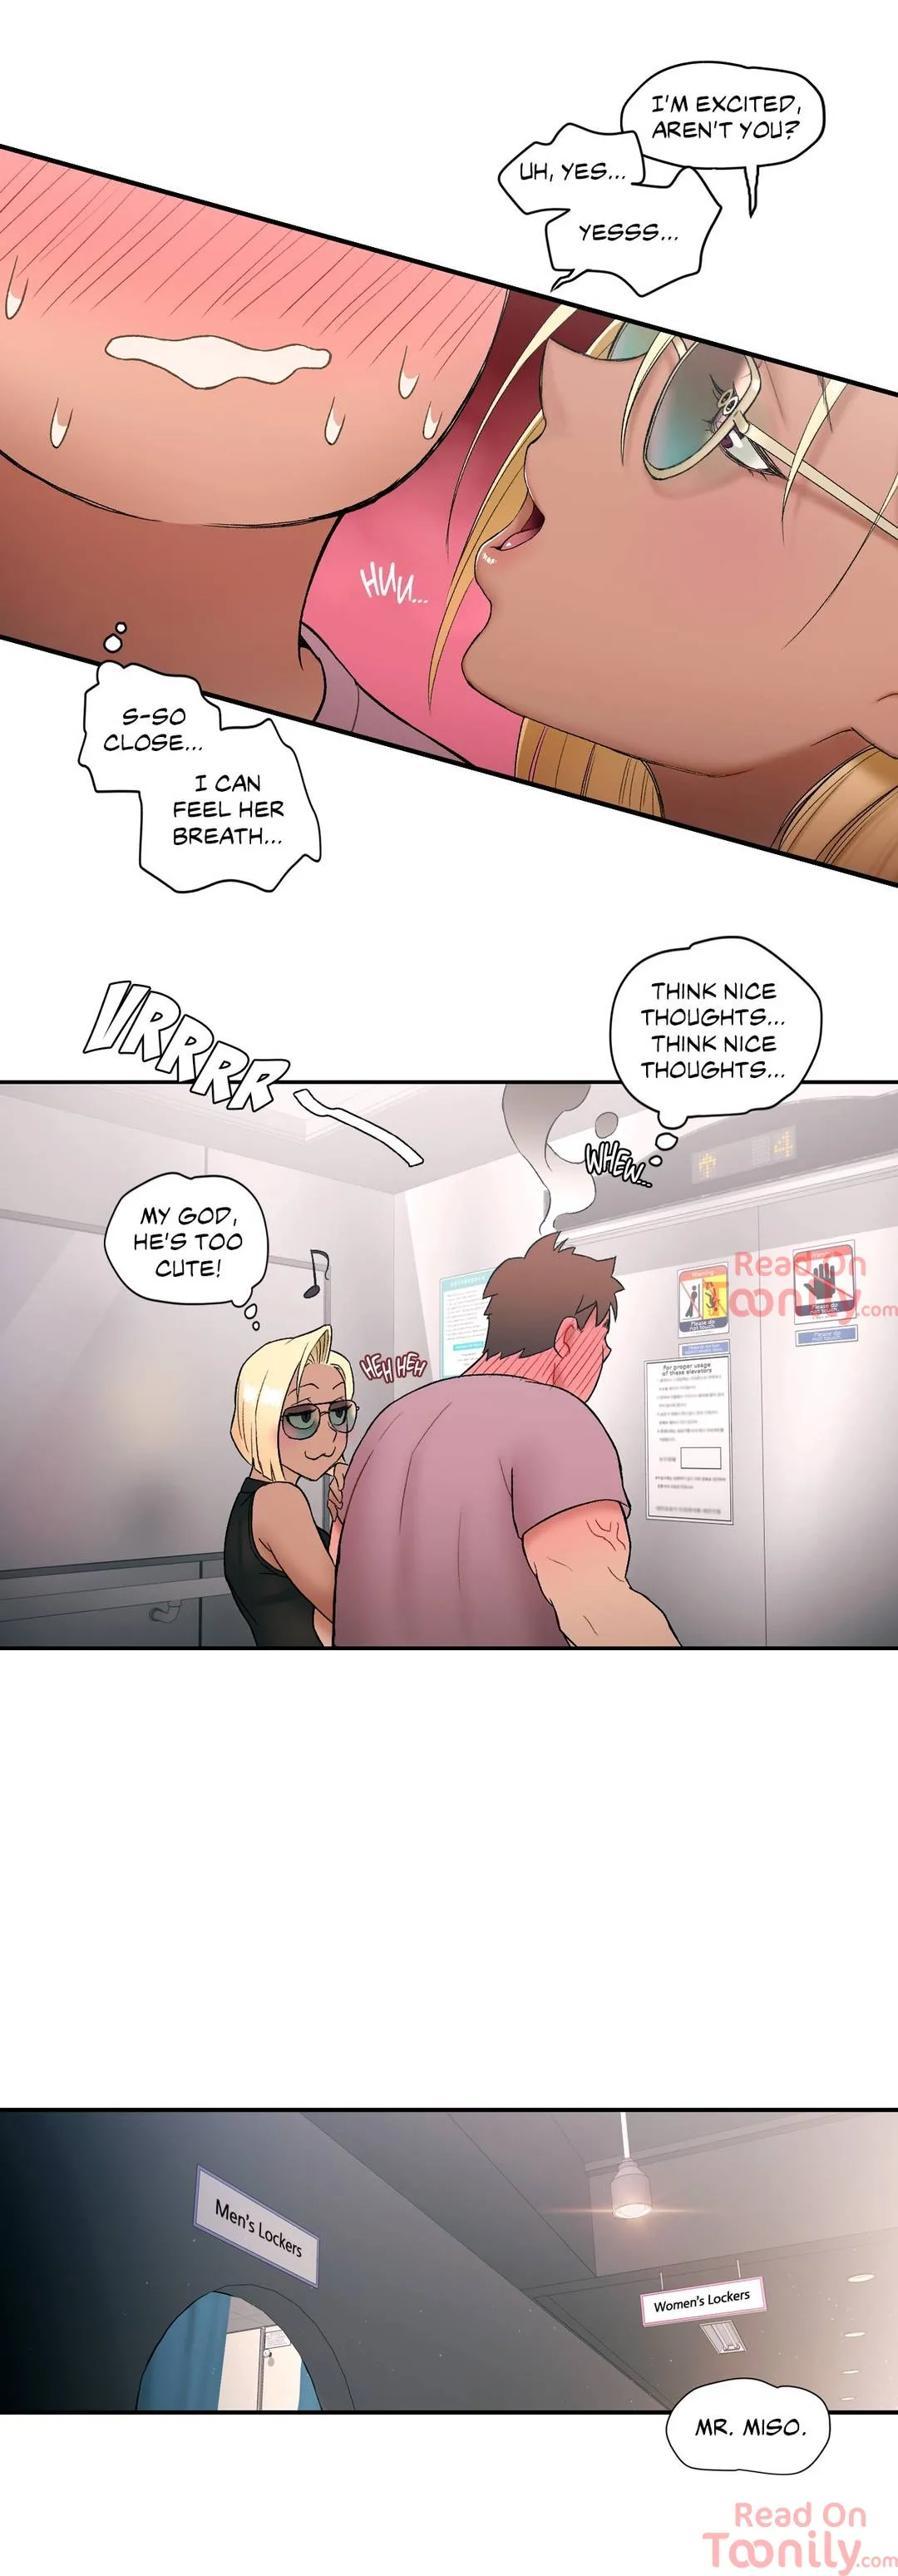 Sexercise - Chapter 9 Page 10